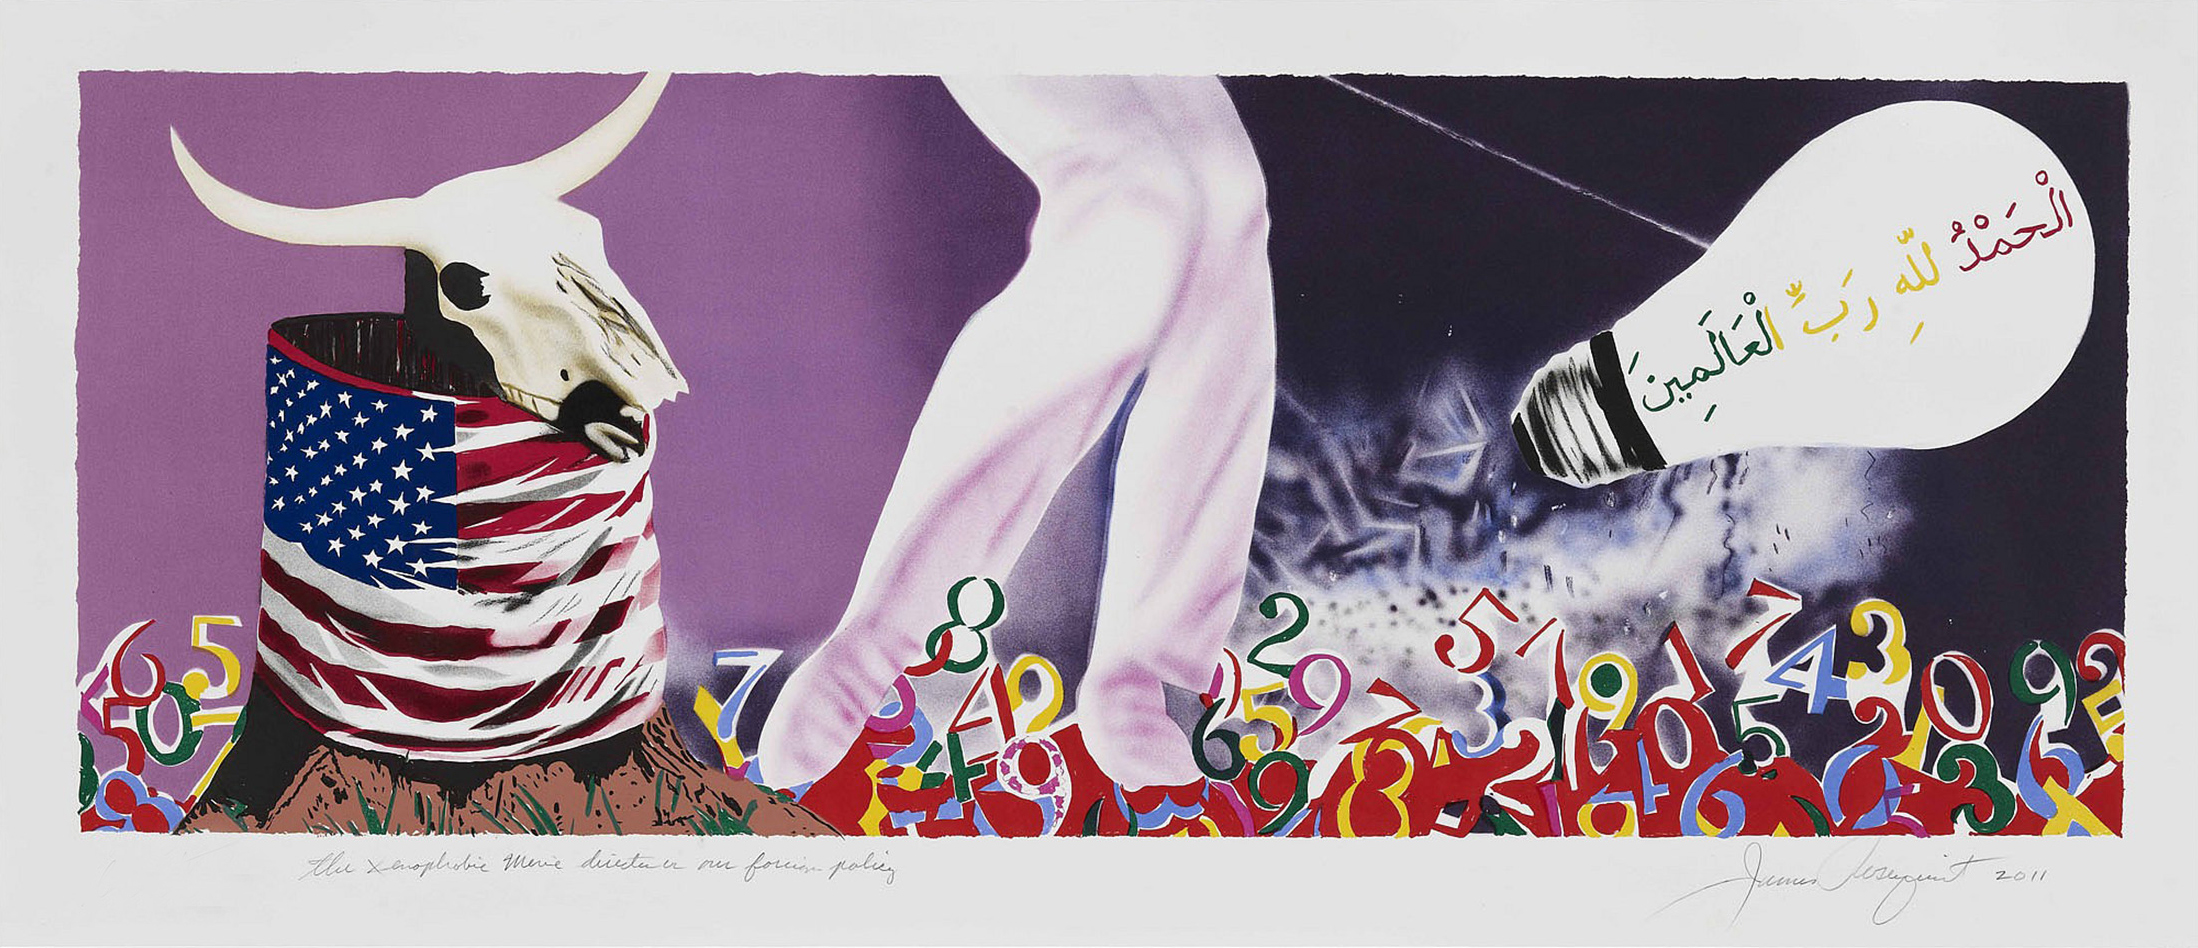 James Rosenquist, The Xenophobic Movie Director or Our Foreign Policy